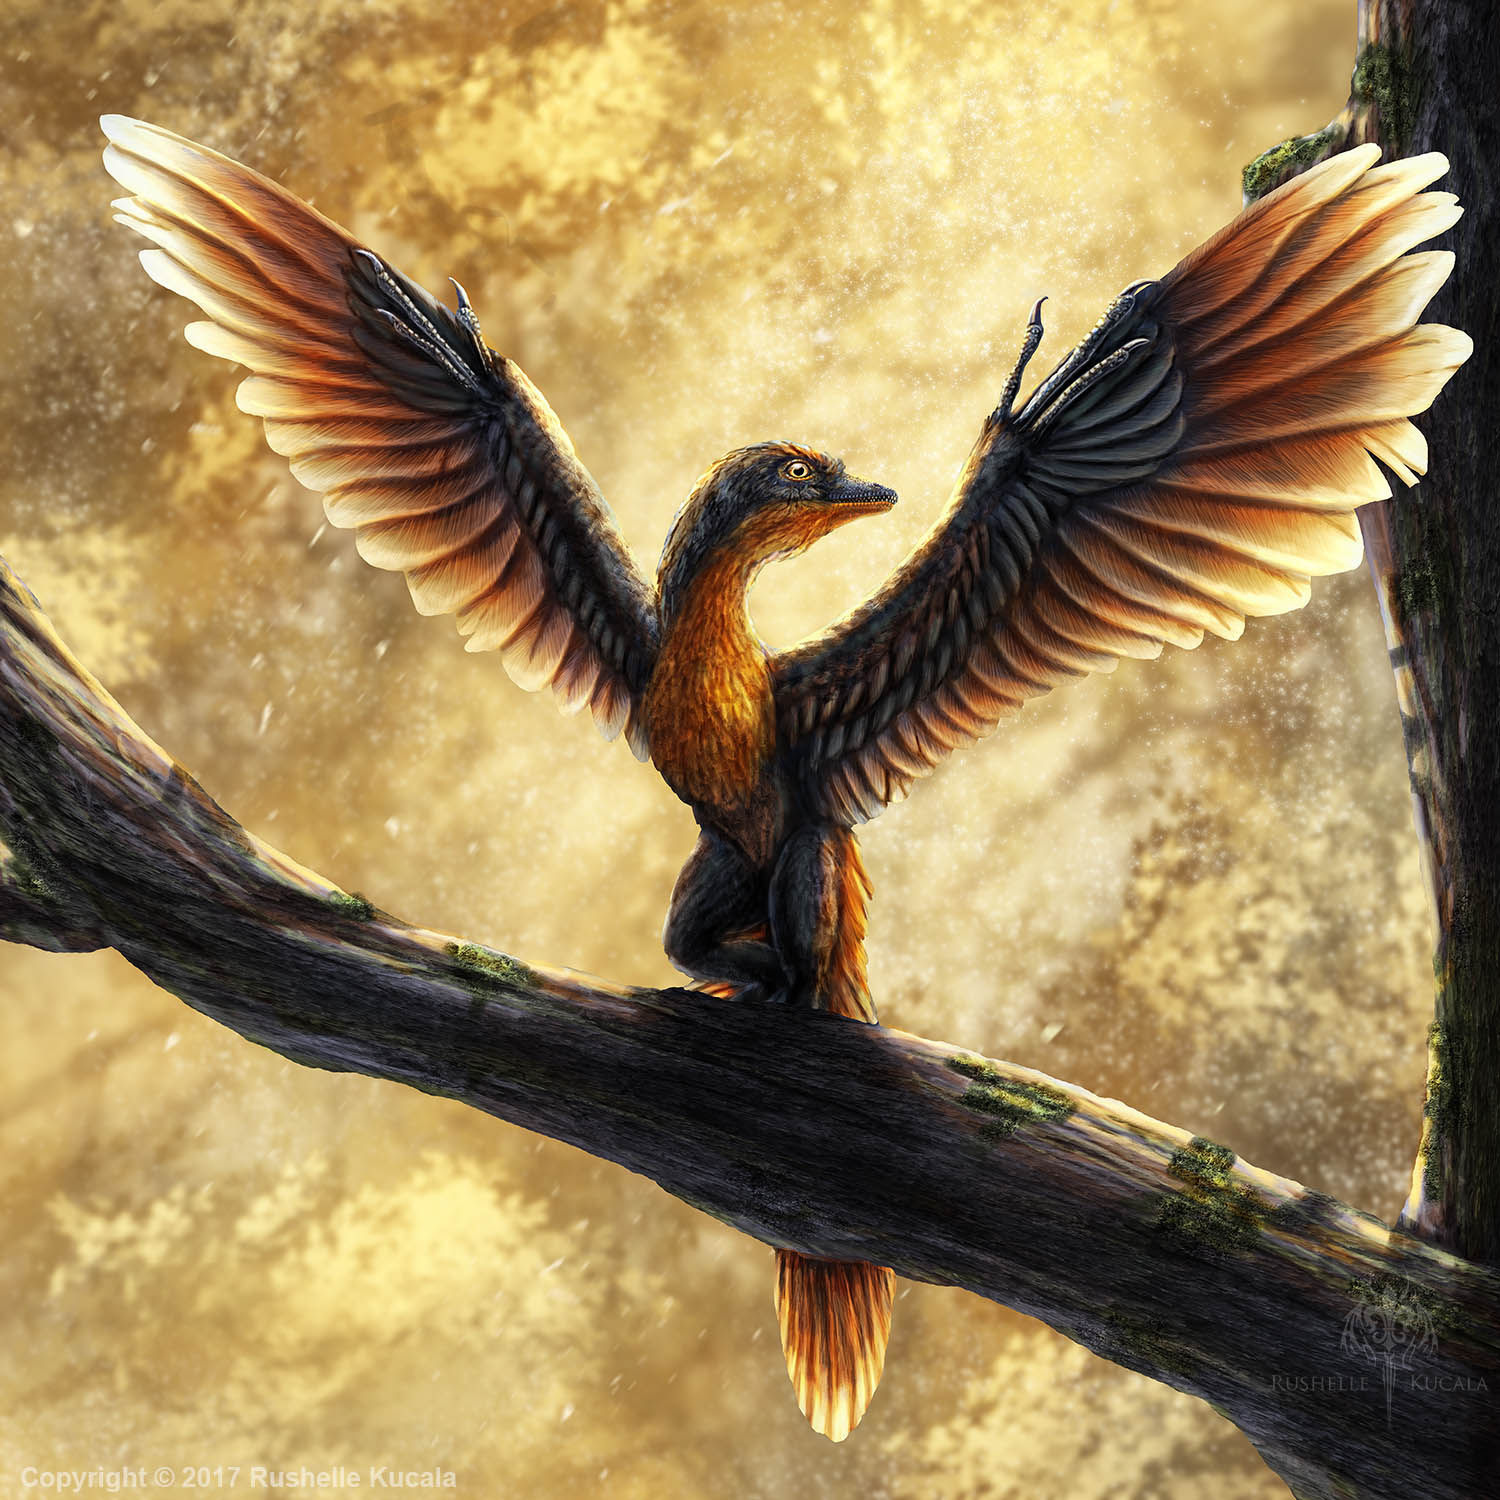 archaeopteryx-lithographica-commission-by-thedragonofdoom-on-deviantart